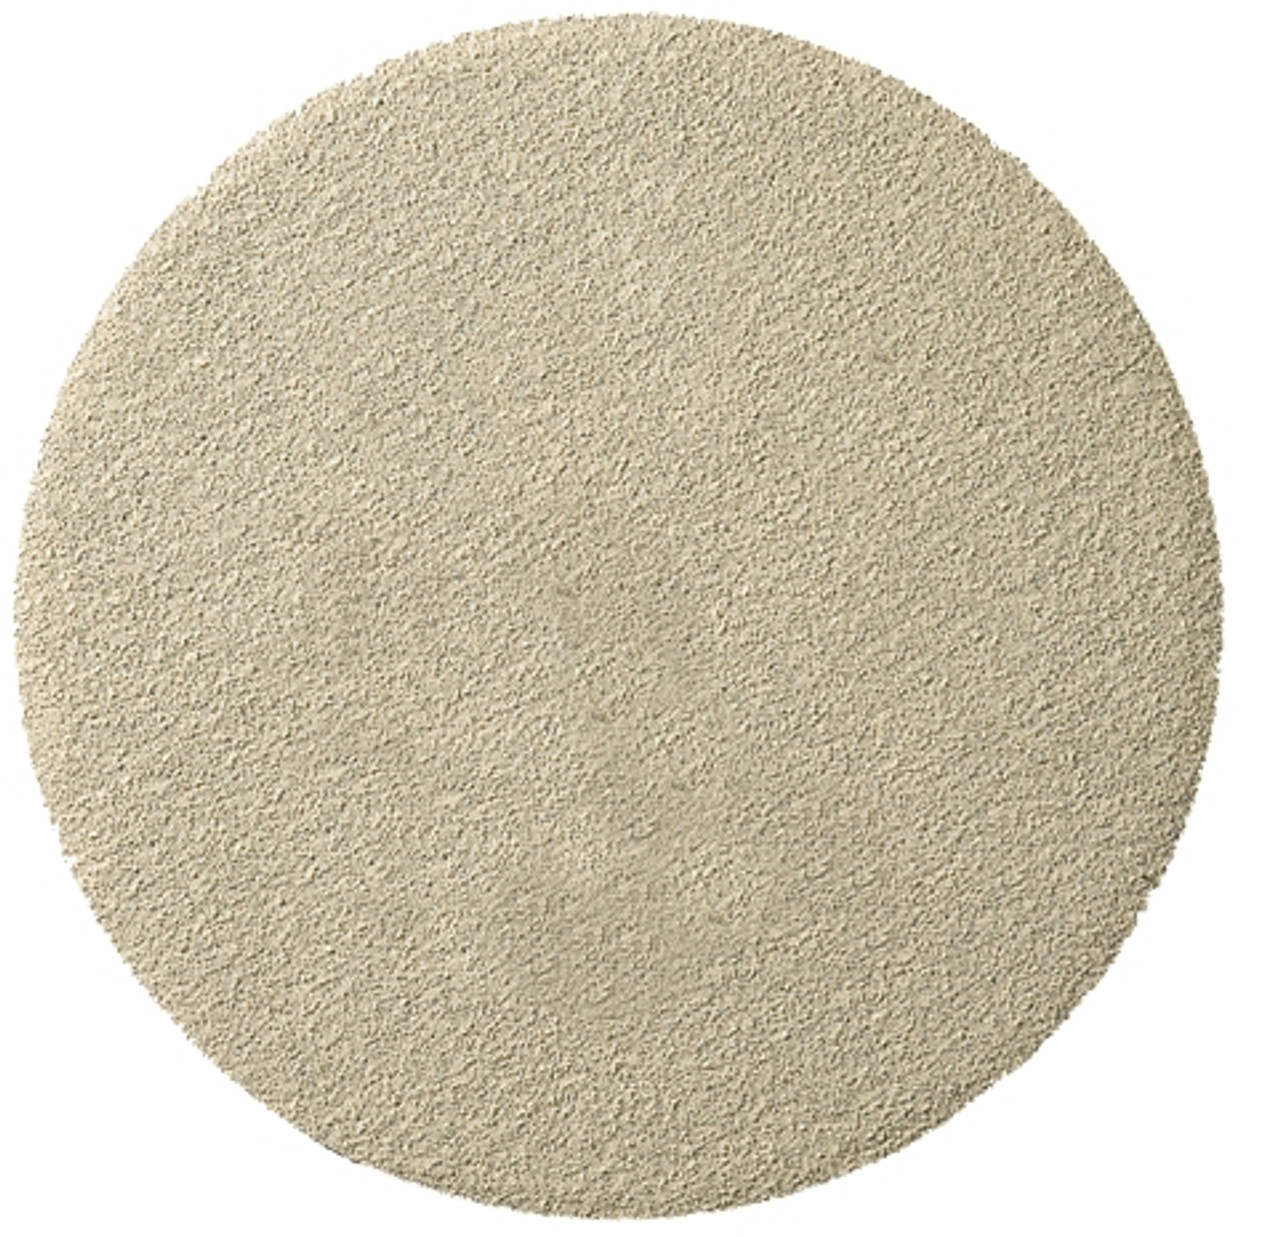 Self Fastening Disc - (Ps33) Paper/Aluminium Oxide/No Hole 240Grit 125Mm